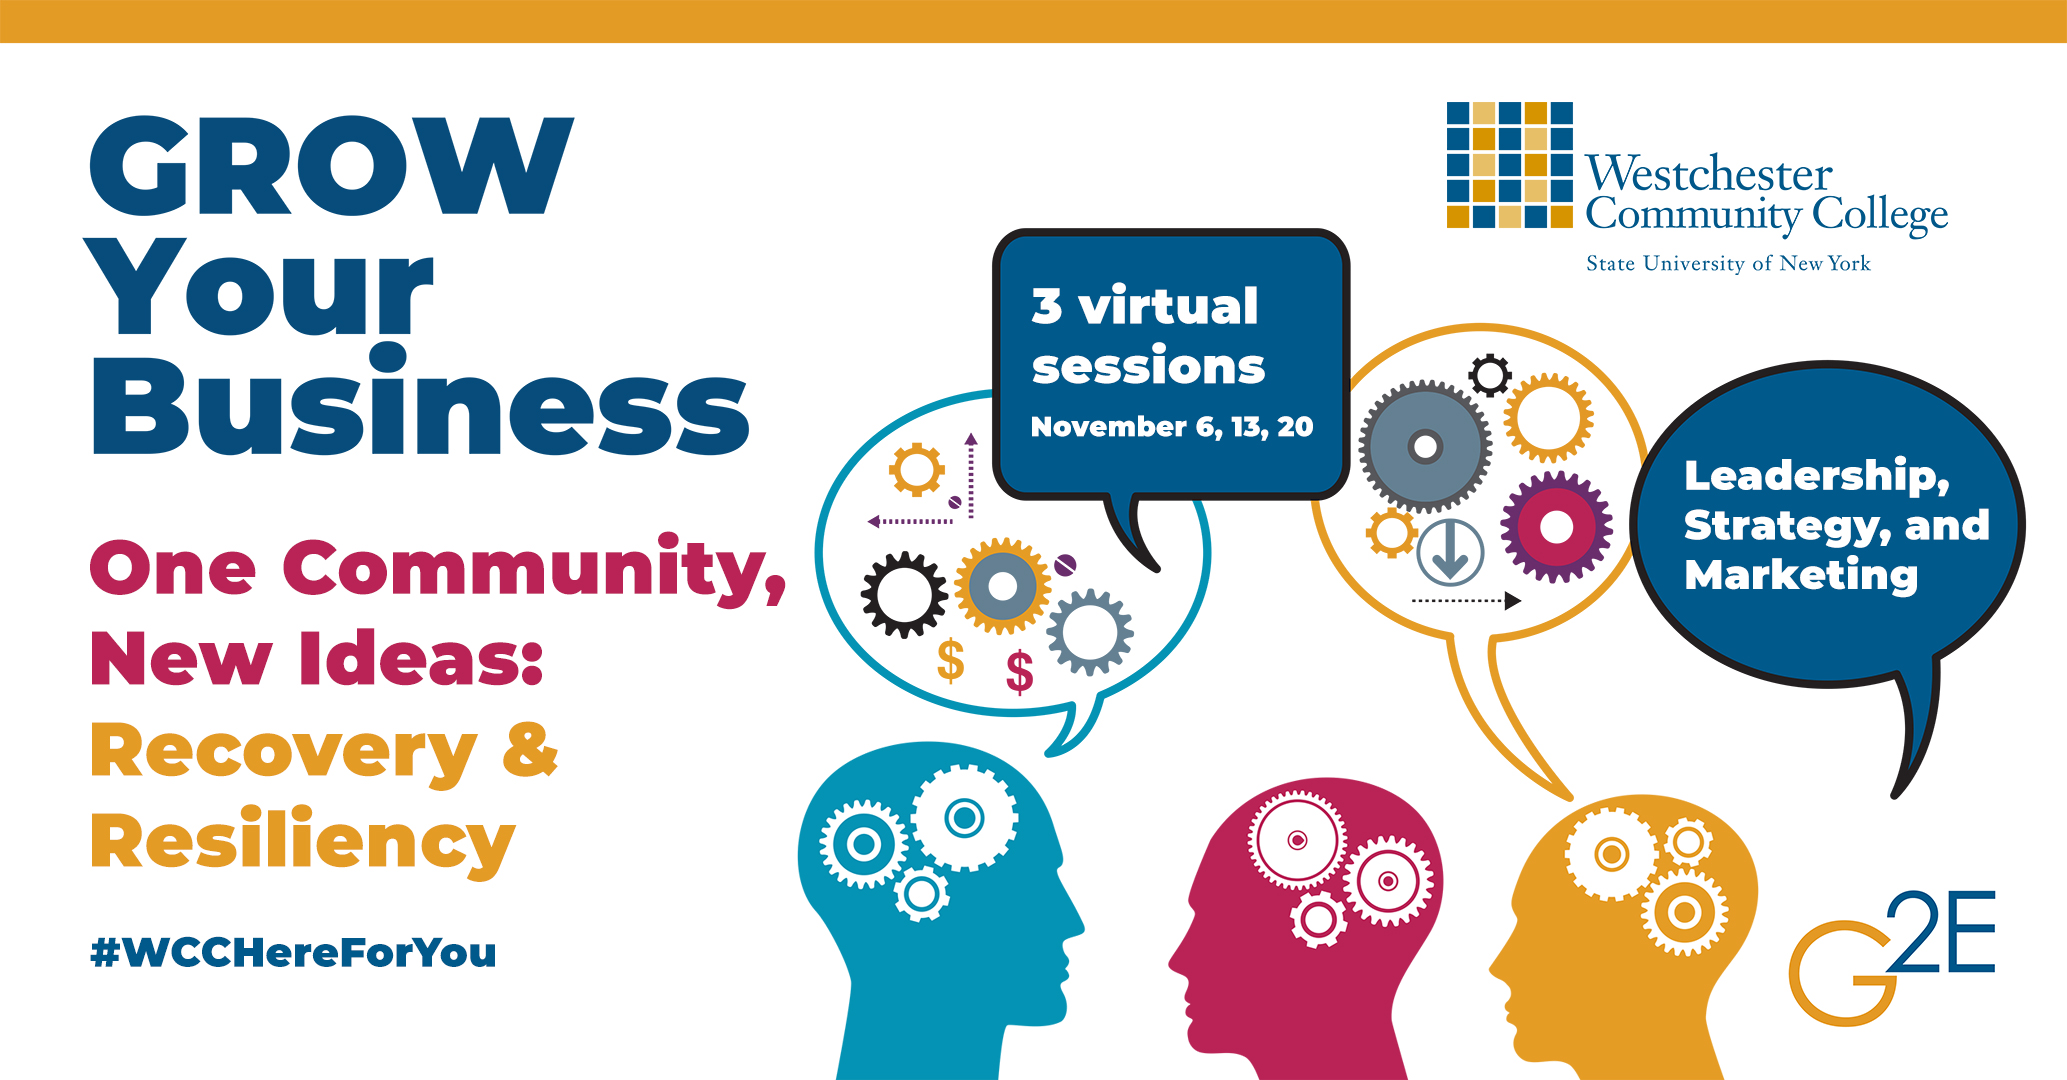 GROW YOUR BUSINESS. ONE COMMUNITY, NEW IDEAS:
RECOVERY AND RESILIENCY!